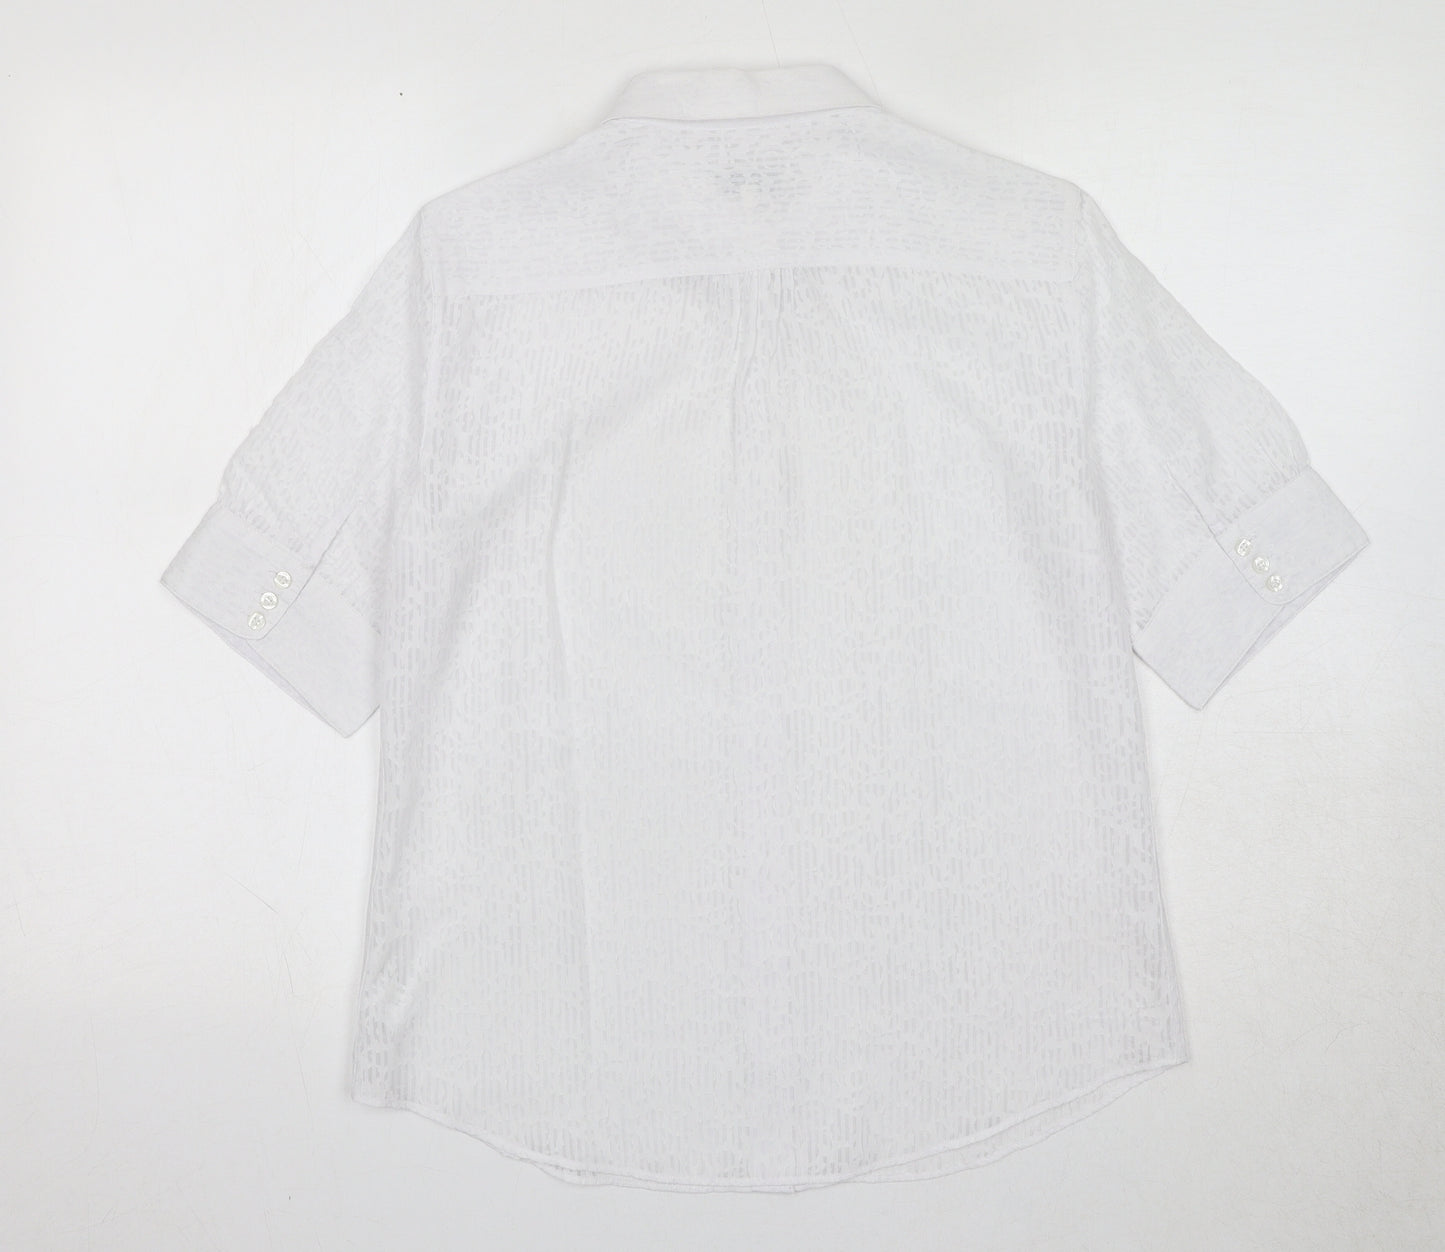 Austin Reed Womens White Geometric Polyester Basic Button-Up Size 12 Collared